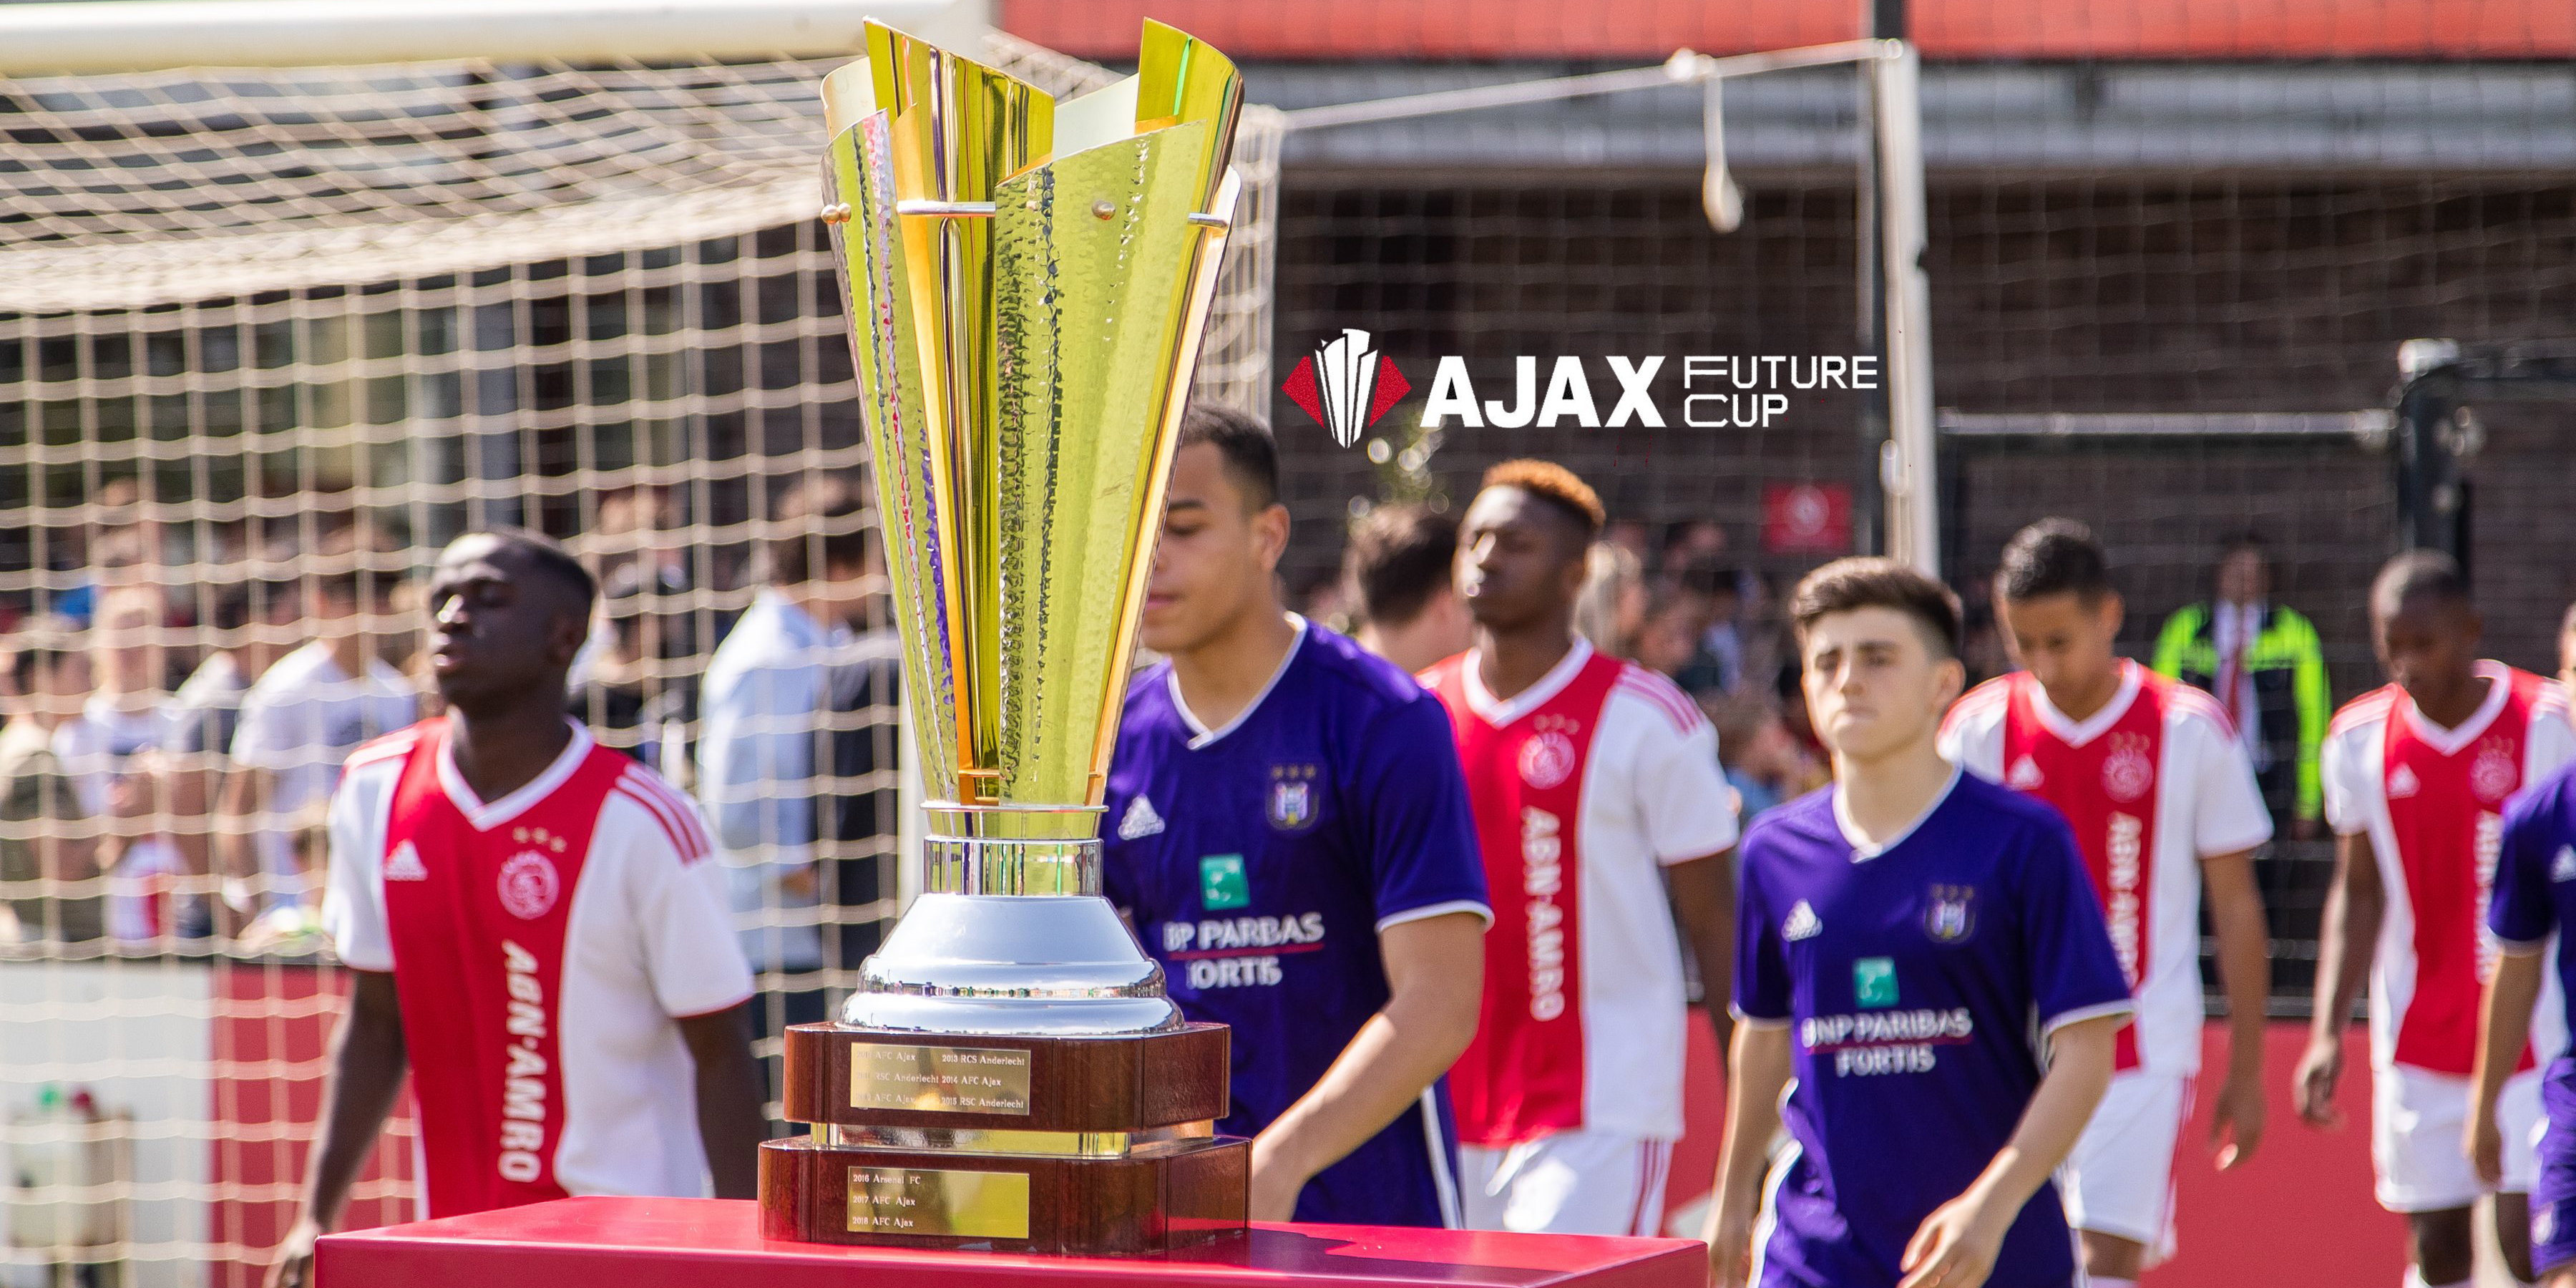 Third place at the Ajax Future Cup